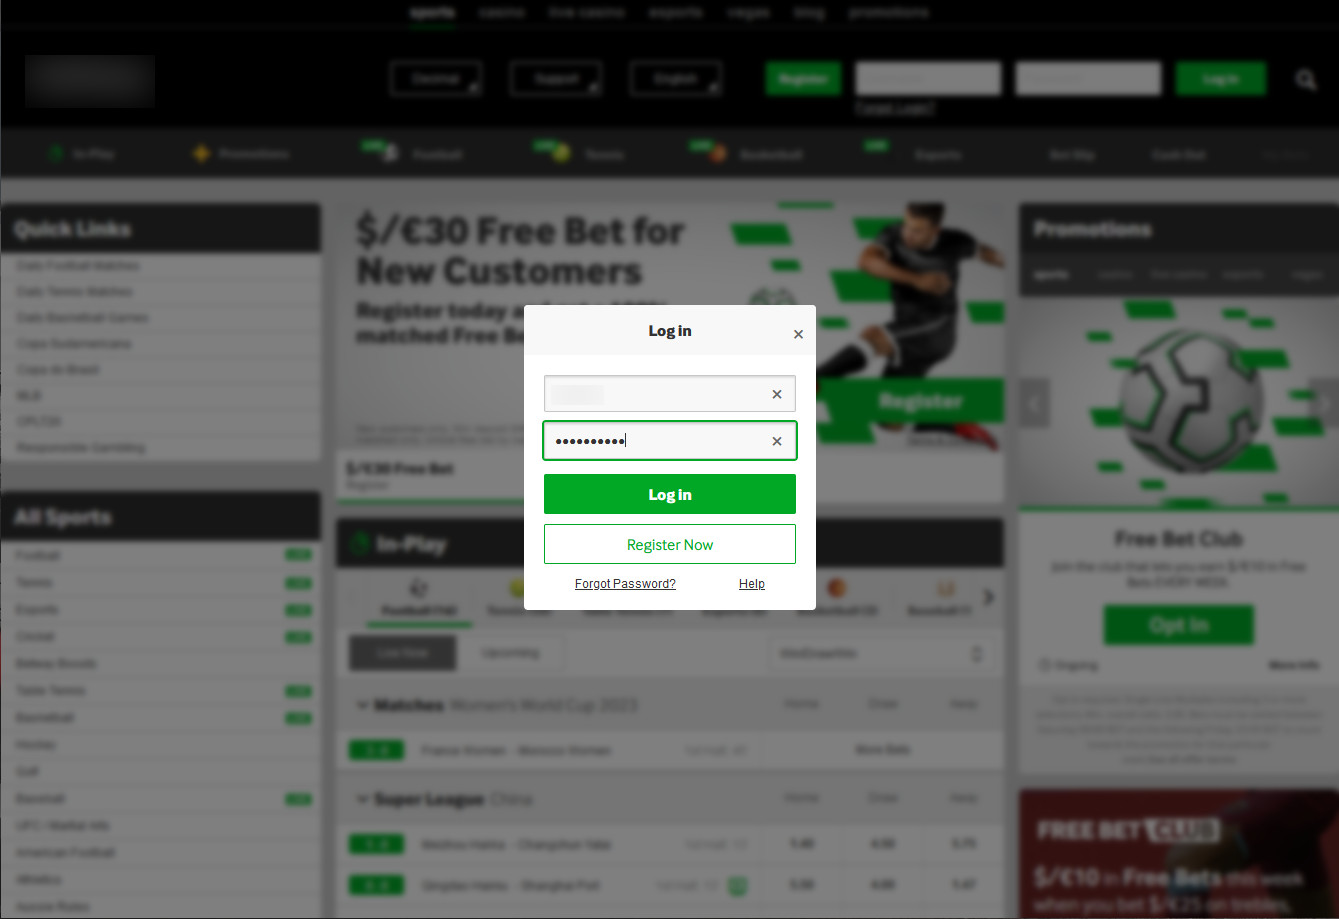 Log in to your personal account on your favorite betting site